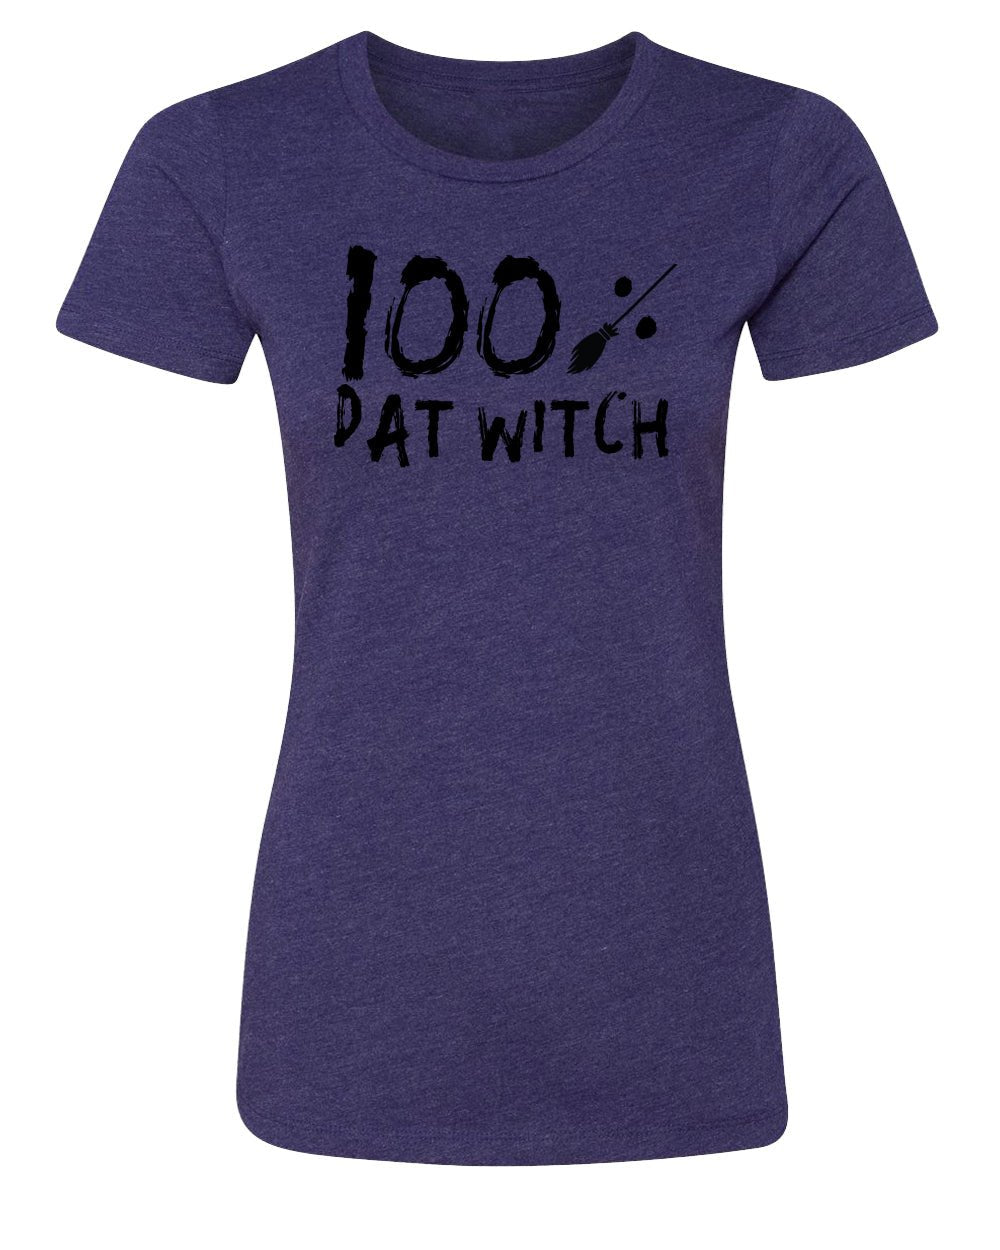 Shirt - 100% Dat Witch T-shirts, Women's Graphic Tees, Funny Halloween Shirts Womens